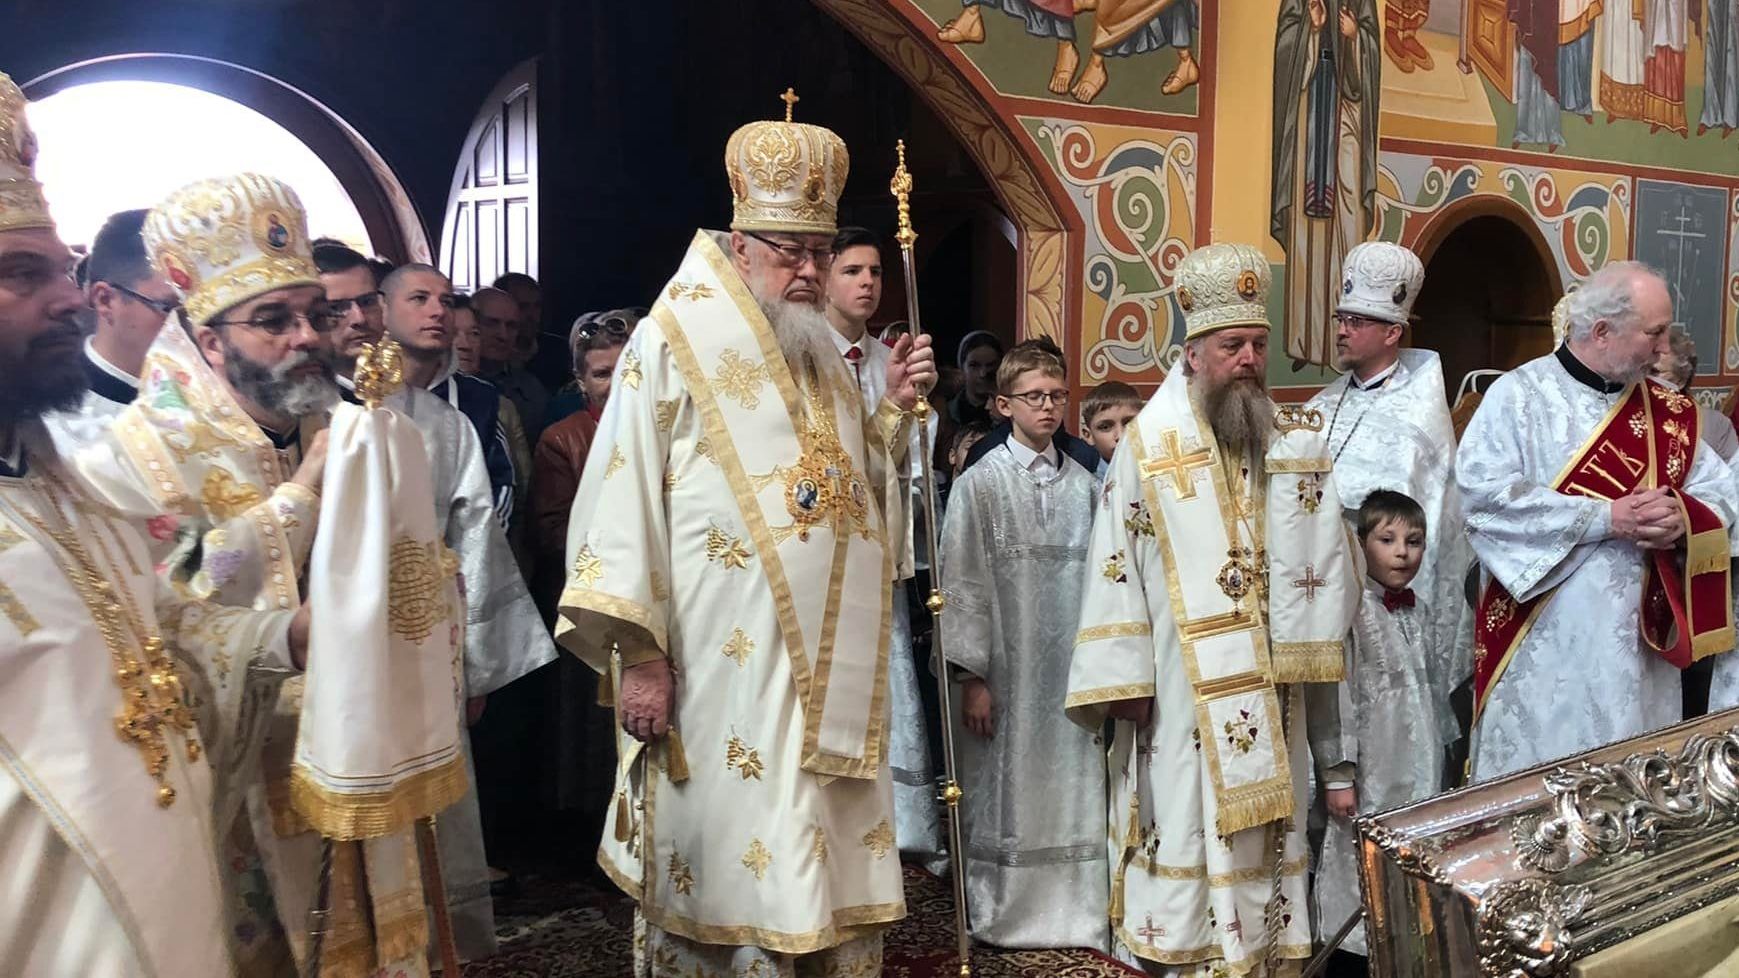 The Liturgical celebration in honour of St. Gabriel of Bialystok in the Orthodox nunnery in Zwierki, Poland, presided over by Metropolitan Sava of Warsaw on 3rd May 2022 - фото 93892